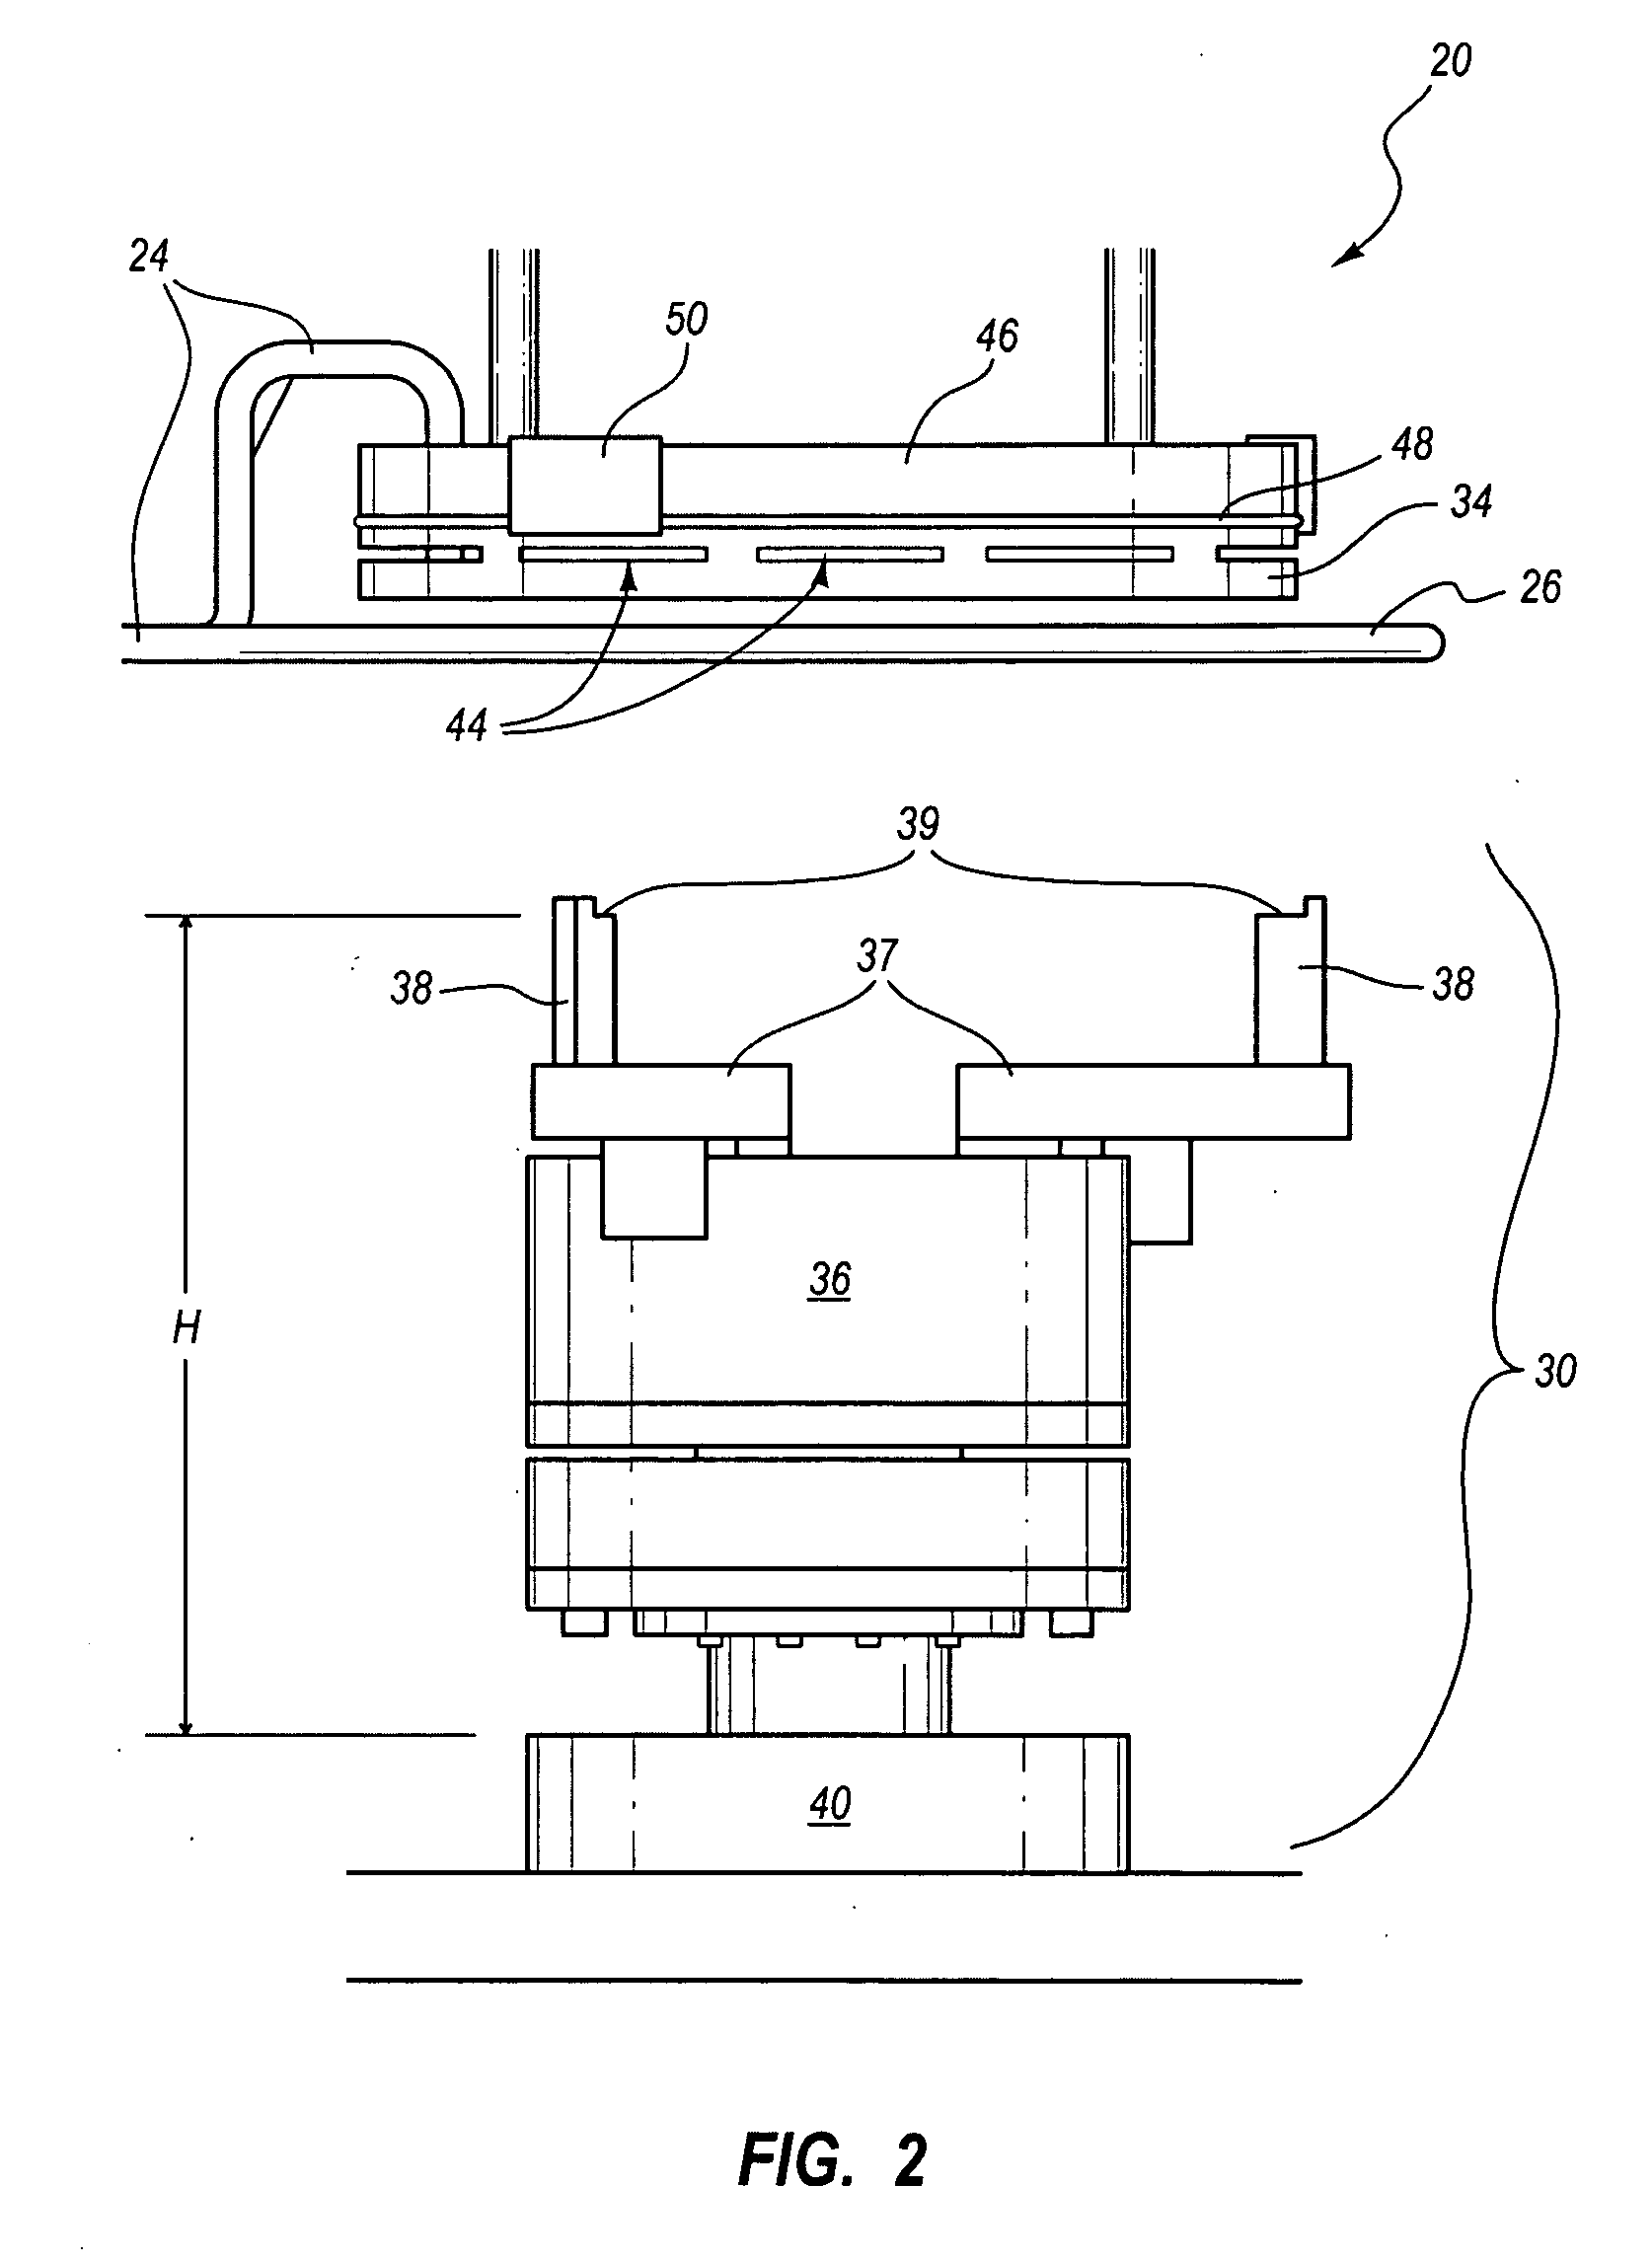 Apparatuses and methods for induction heating